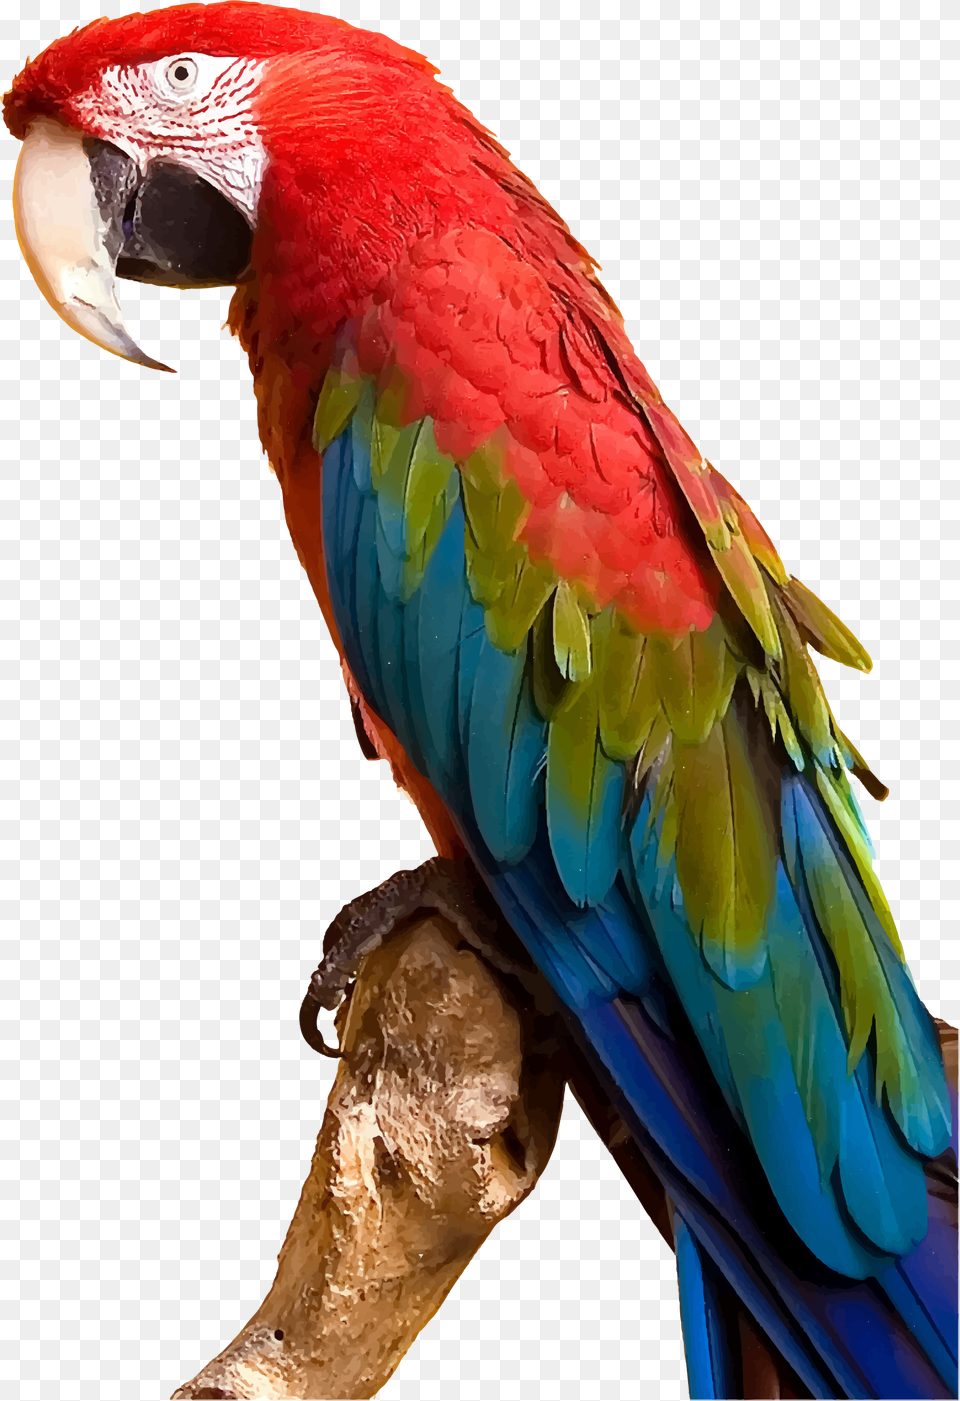 Colorful Parrot By Gdj Parrot, Animal, Bird, Macaw Png